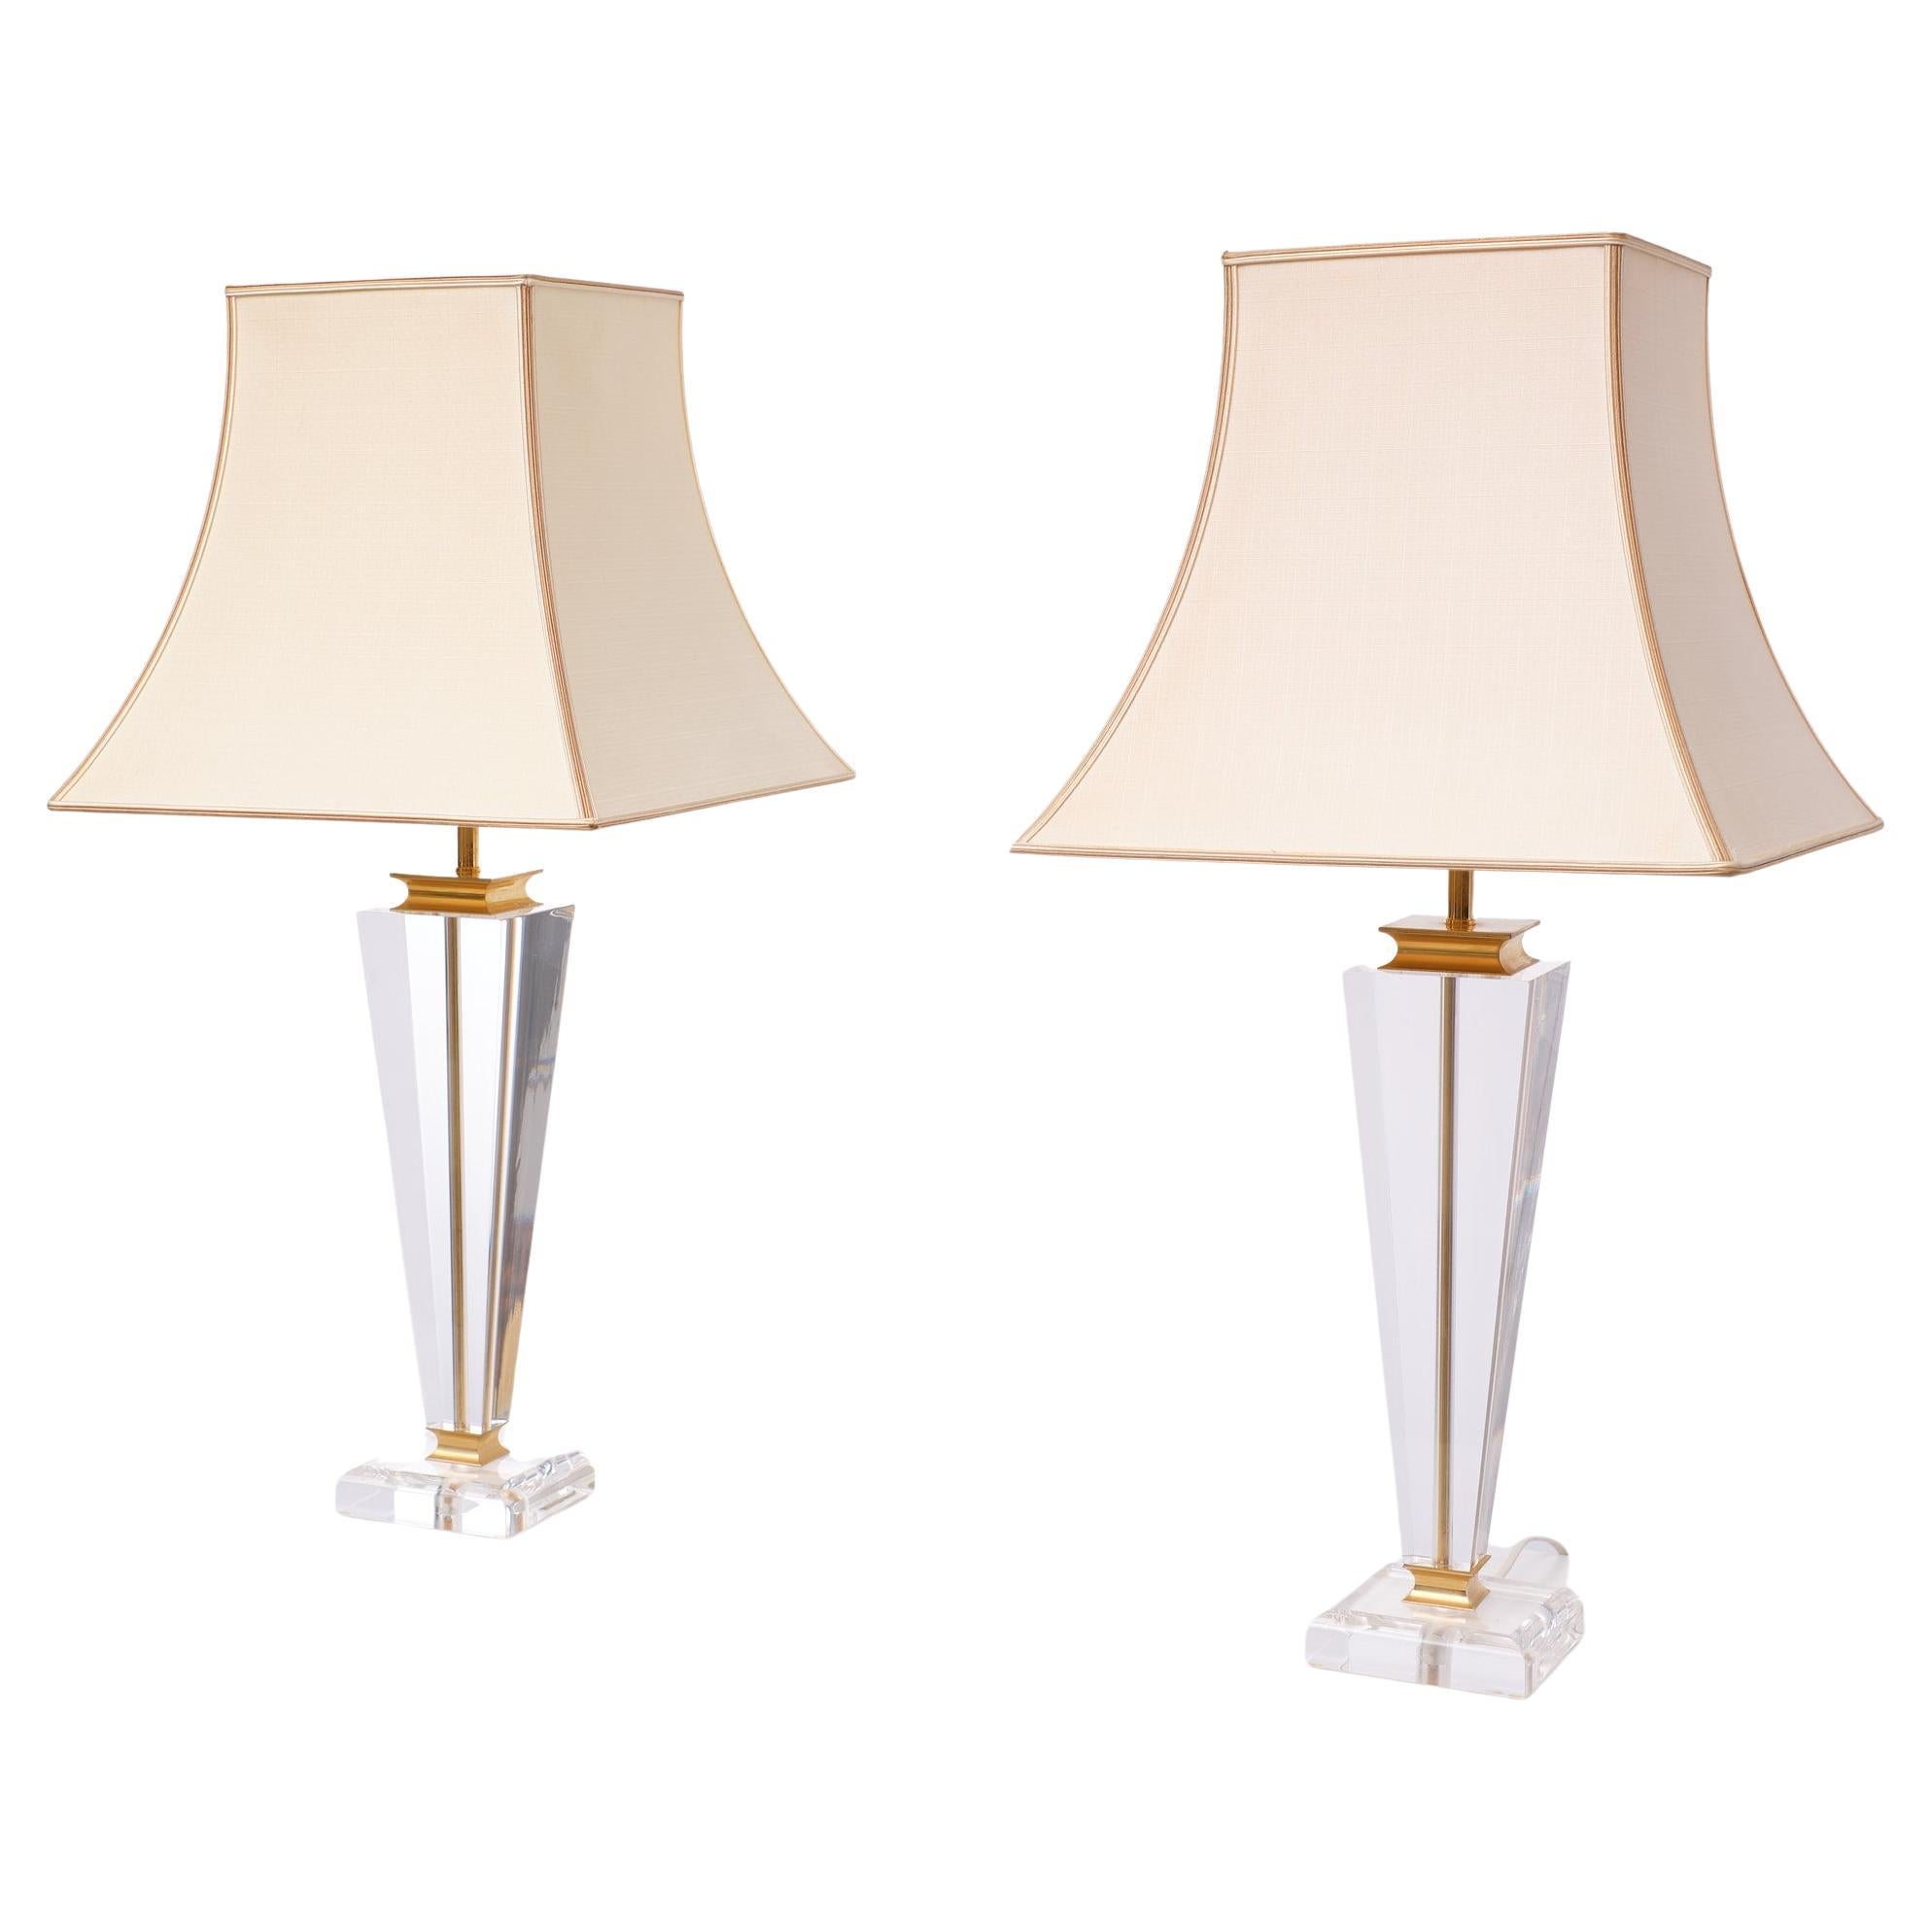 Late 20th Century Hollywood Regency Parigi  Lucite table lamps  1970s Italy  For Sale